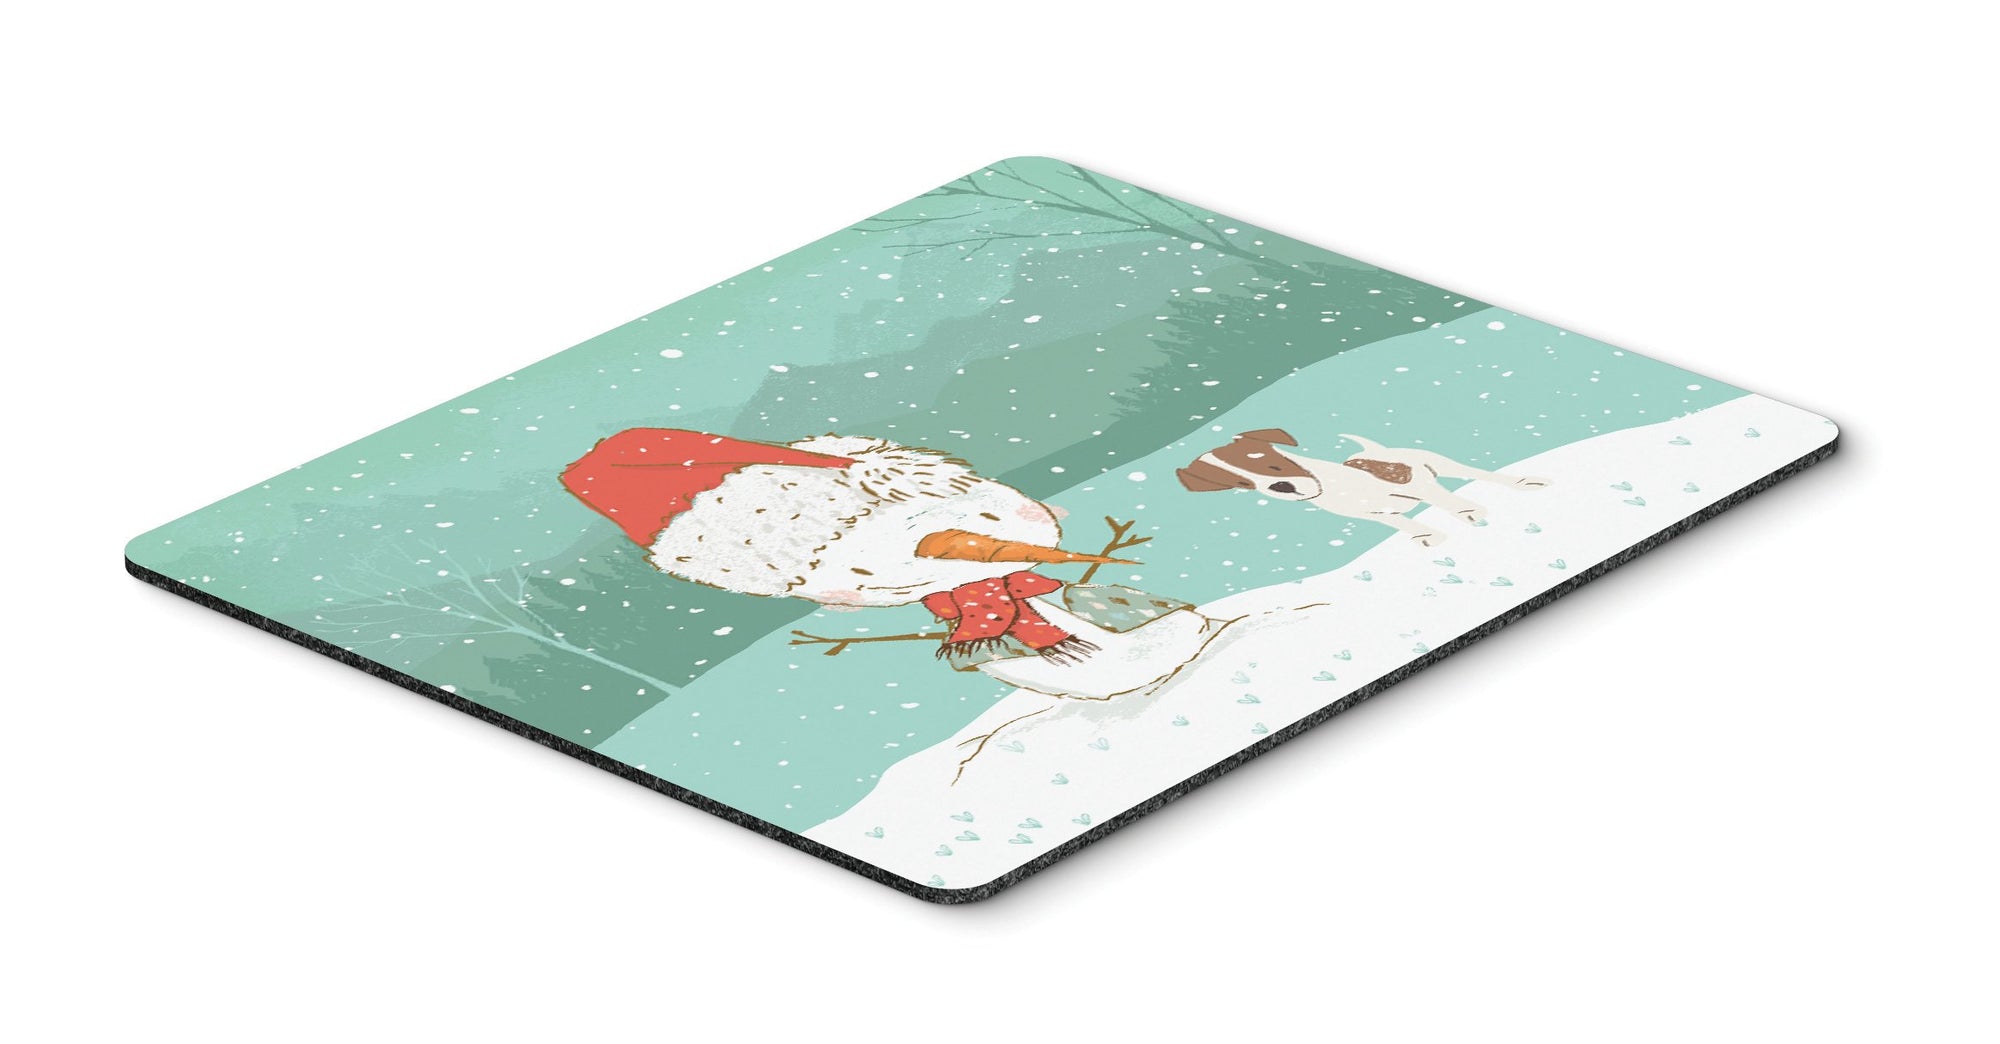 Jack Russell Terrier #2 Snowman Christmas Mouse Pad, Hot Pad or Trivet CK2091MP by Caroline's Treasures